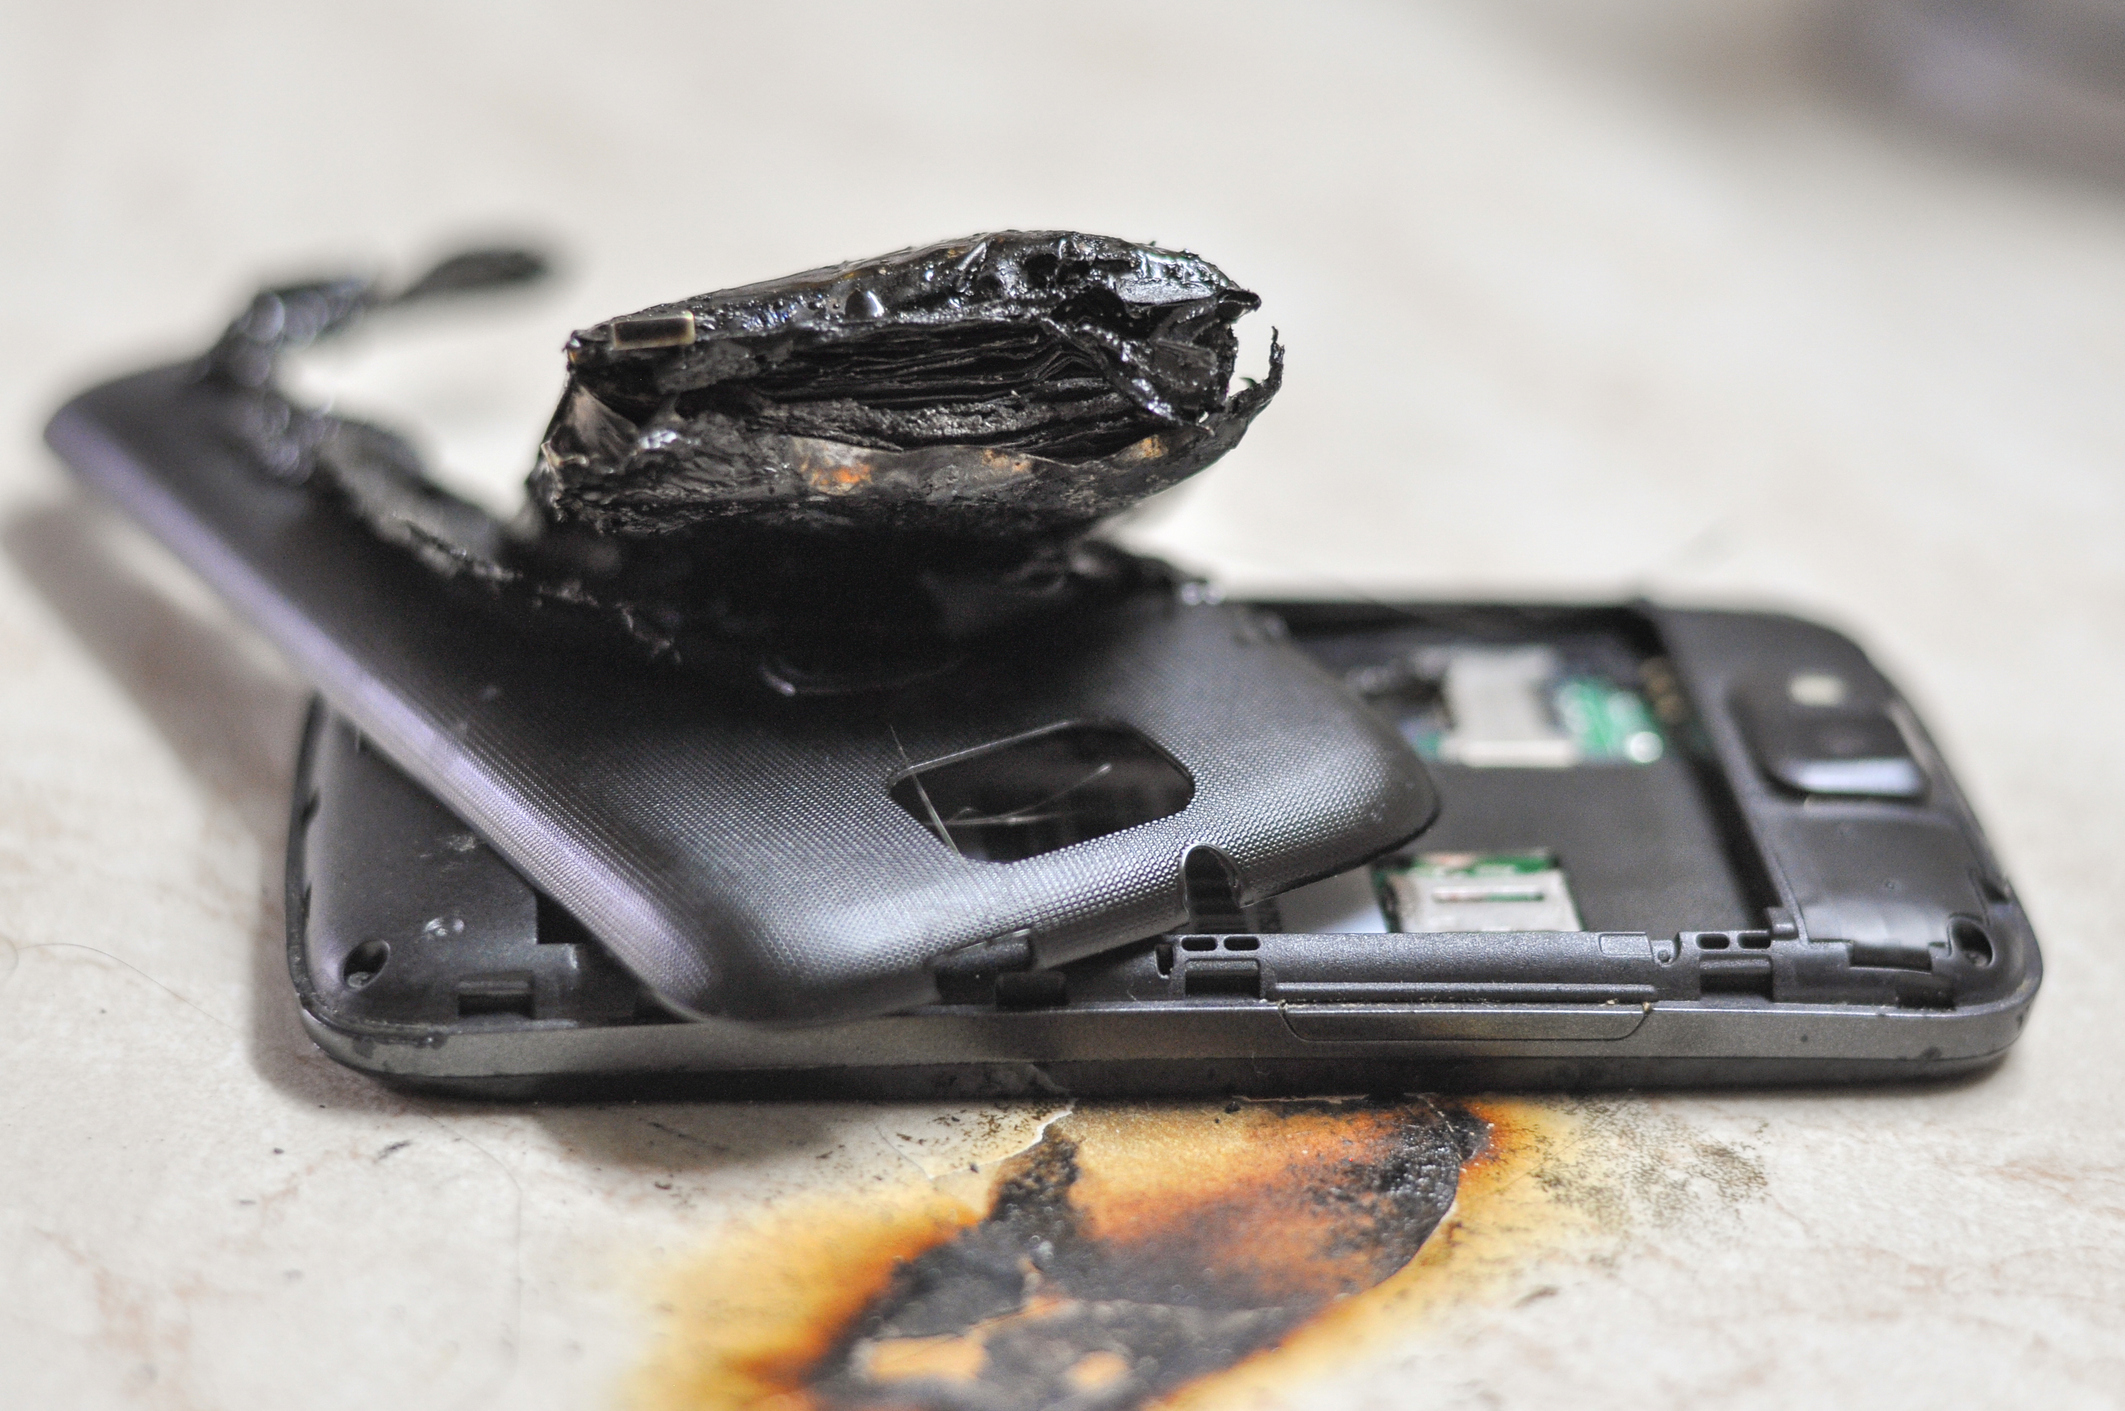 Minnesota Passes Right to Repair Law Making It Legal to Repair Your Devices